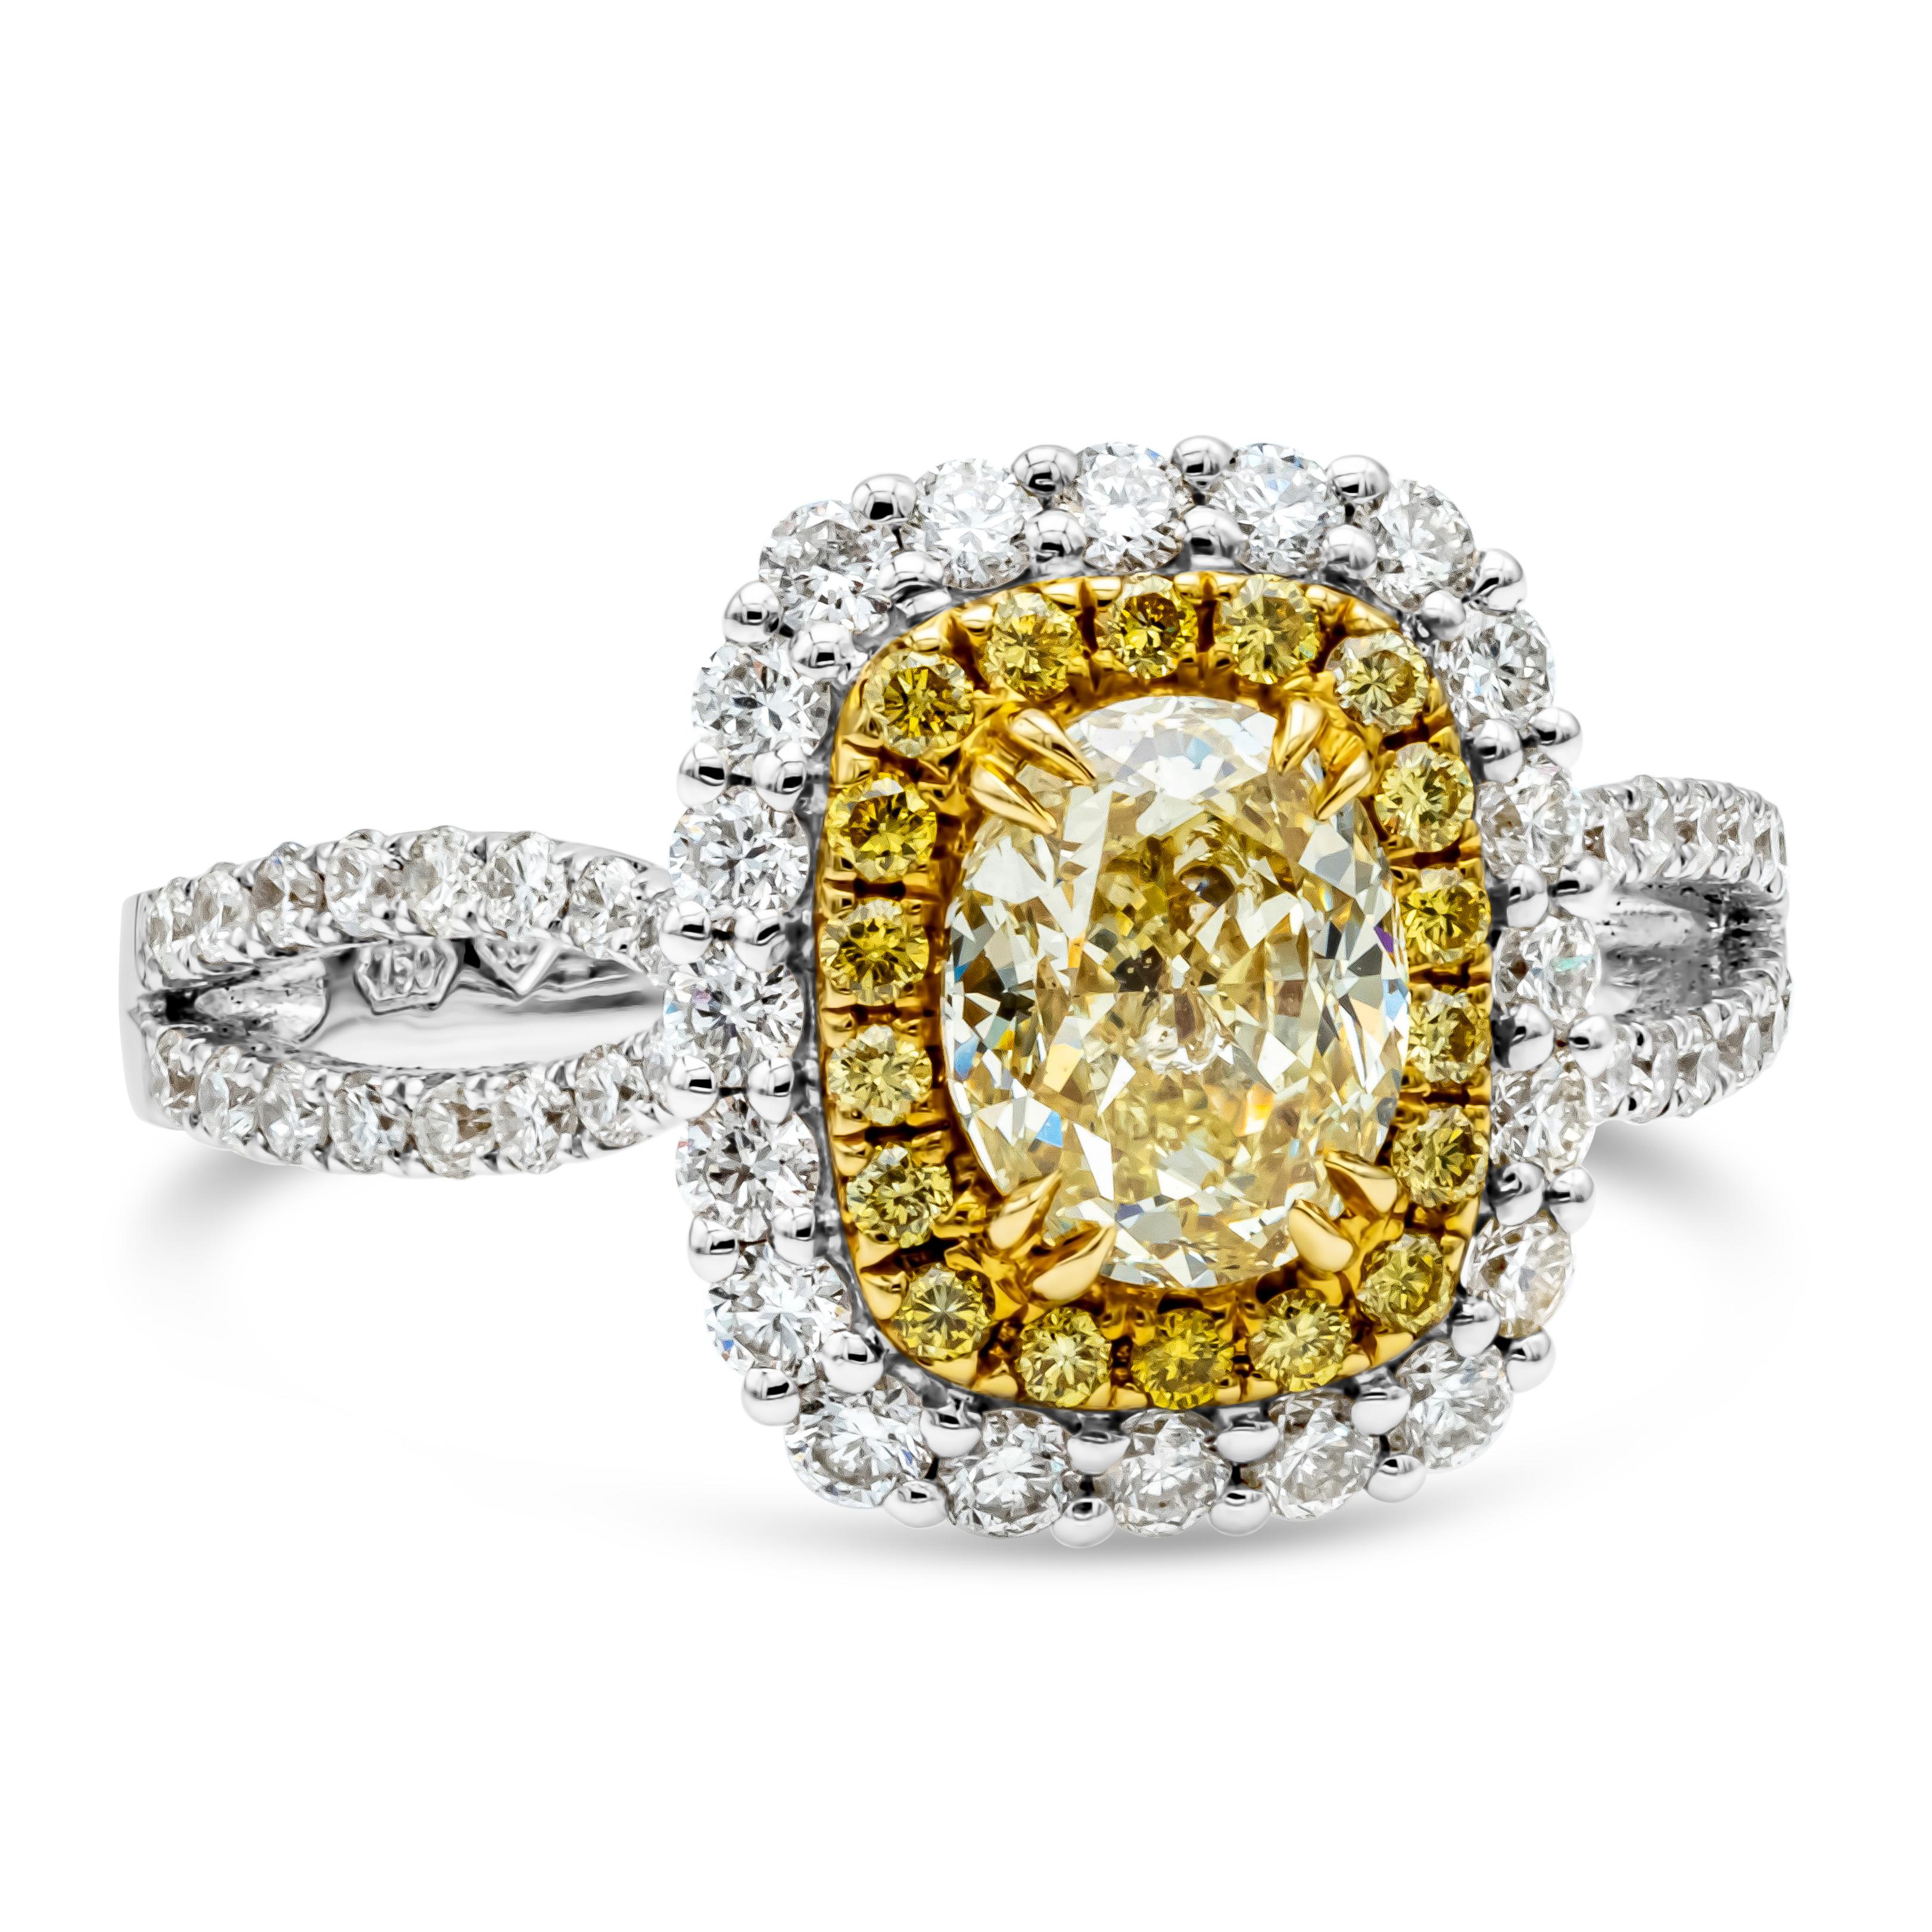 A color-rich and vibrant double halo engagement ring featuring 1.17 carats oval cut diamond center stone that GIA certified as fancy light yellow color and VS2 in clarity, set in a yellow gold four prong basket setting. Surrounded by a double row of